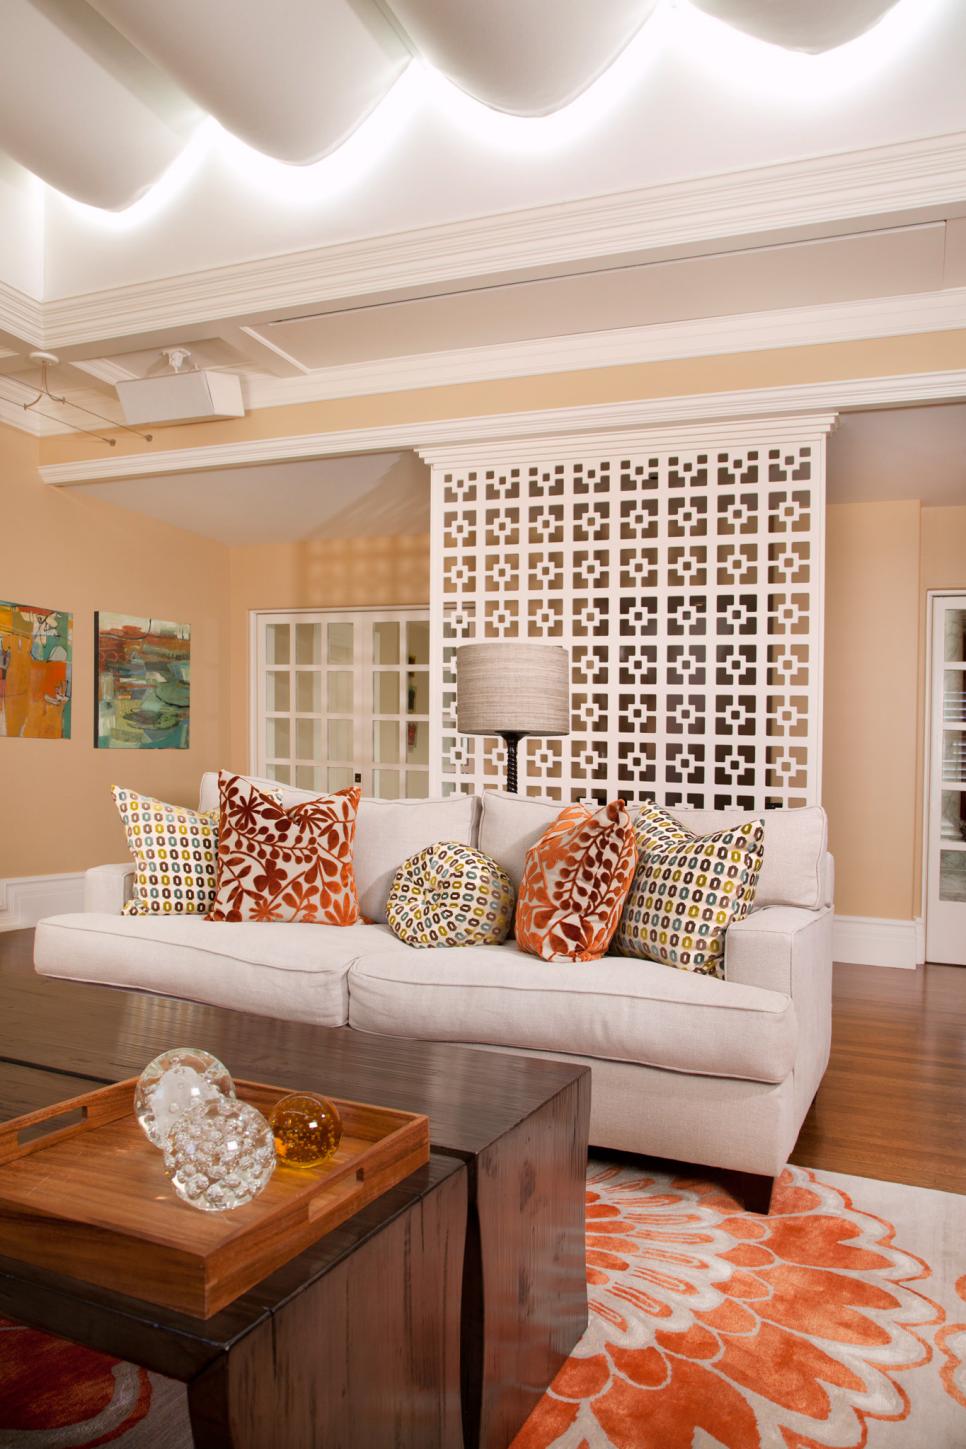 Living Room With White Screen, Sofa, and Orange Floral Rug and Pillows